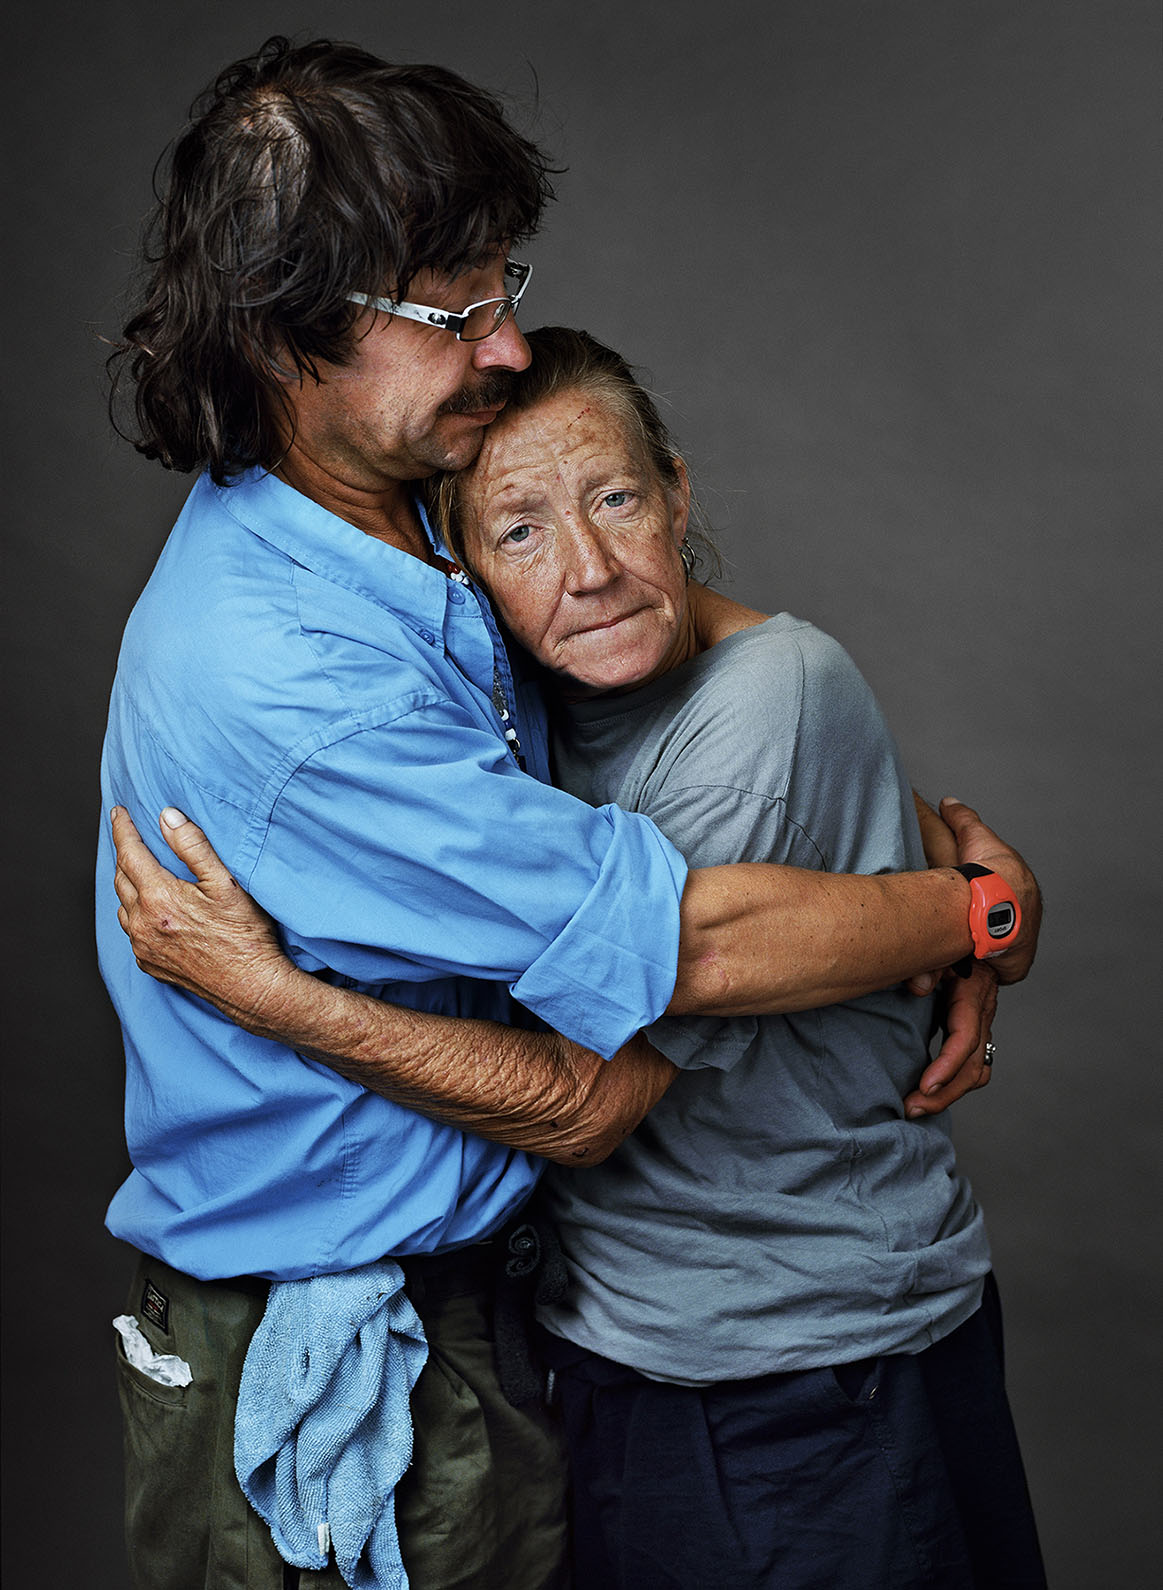 USA. "Down and Out in the South": Studio portraits of homeless people in Atlanta (GA), Columbia (SC) and the Mississippi Delta.  Pierre (b. Canada, 1963) and Cinthia (b. 1959), photographed in Atlanta, GA. June 2011. 